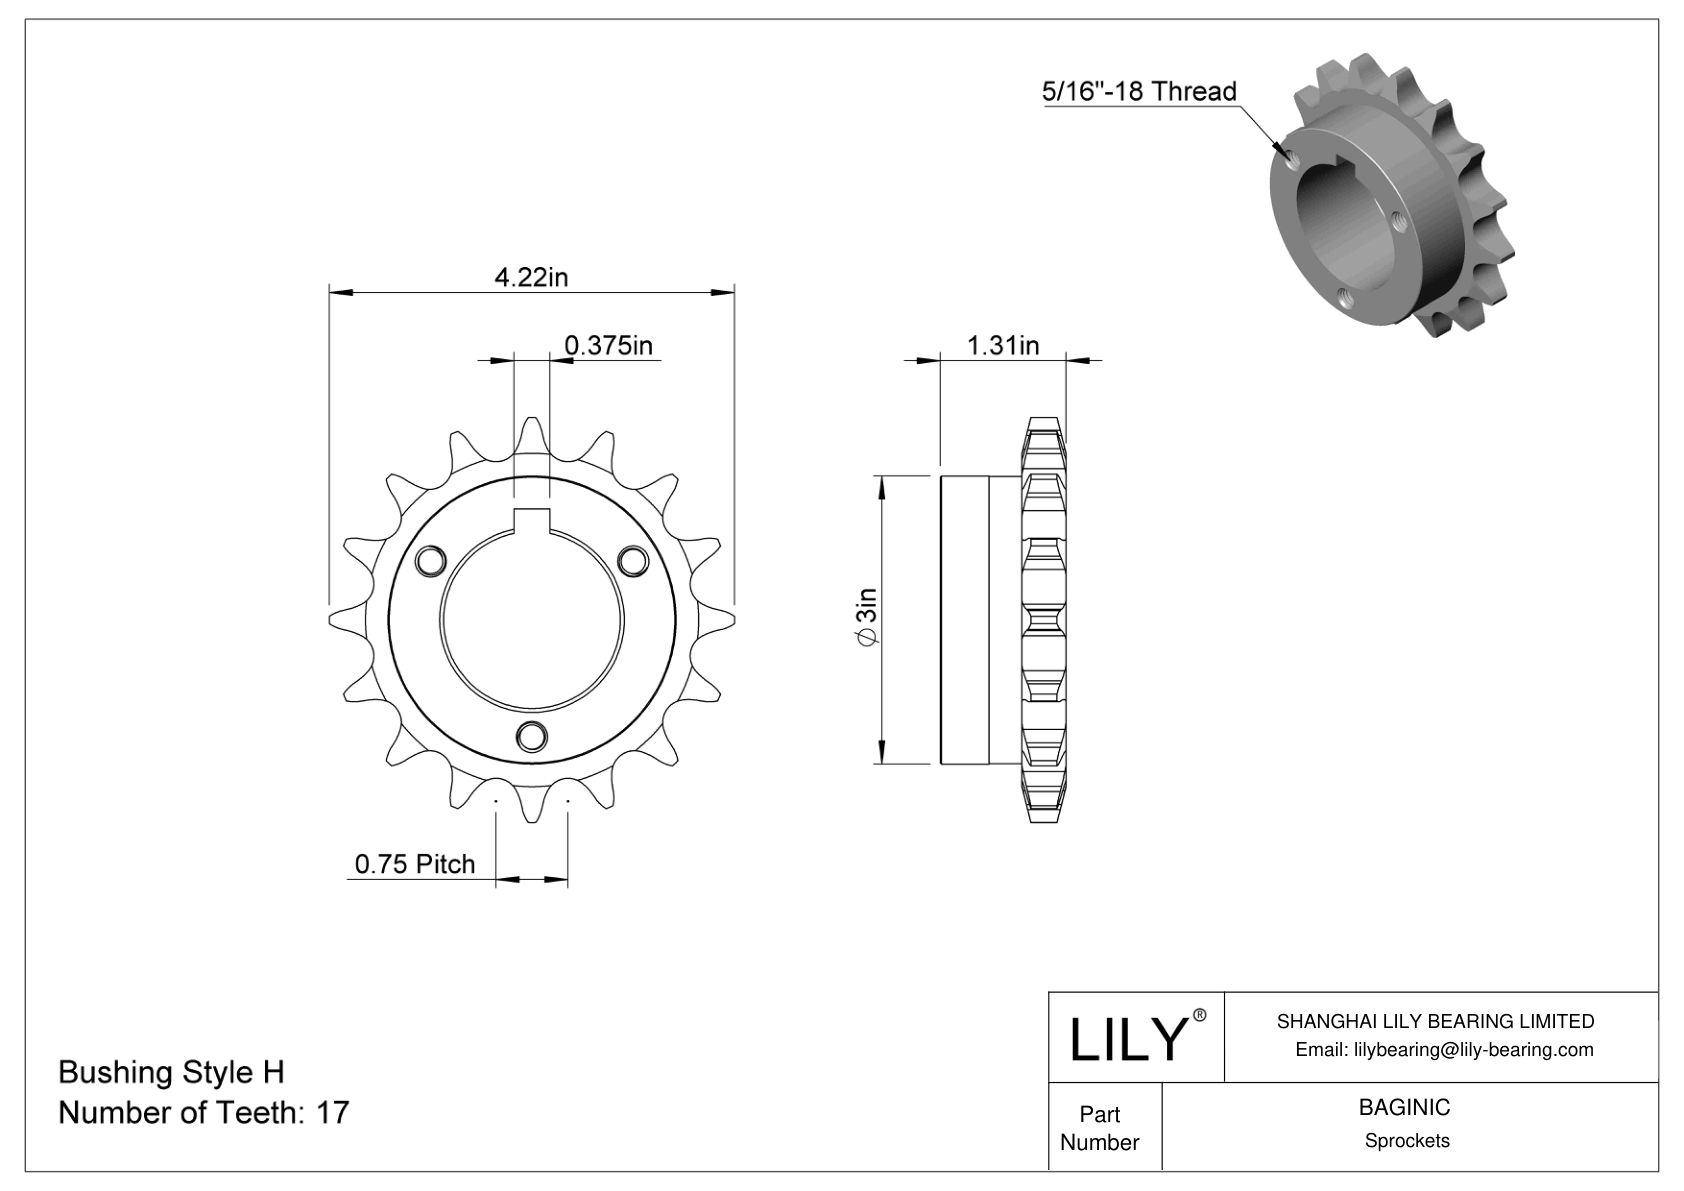 BAGINIC Split-Tapered Bushing-Bore Sprockets for ANSI Roller Chain cad drawing